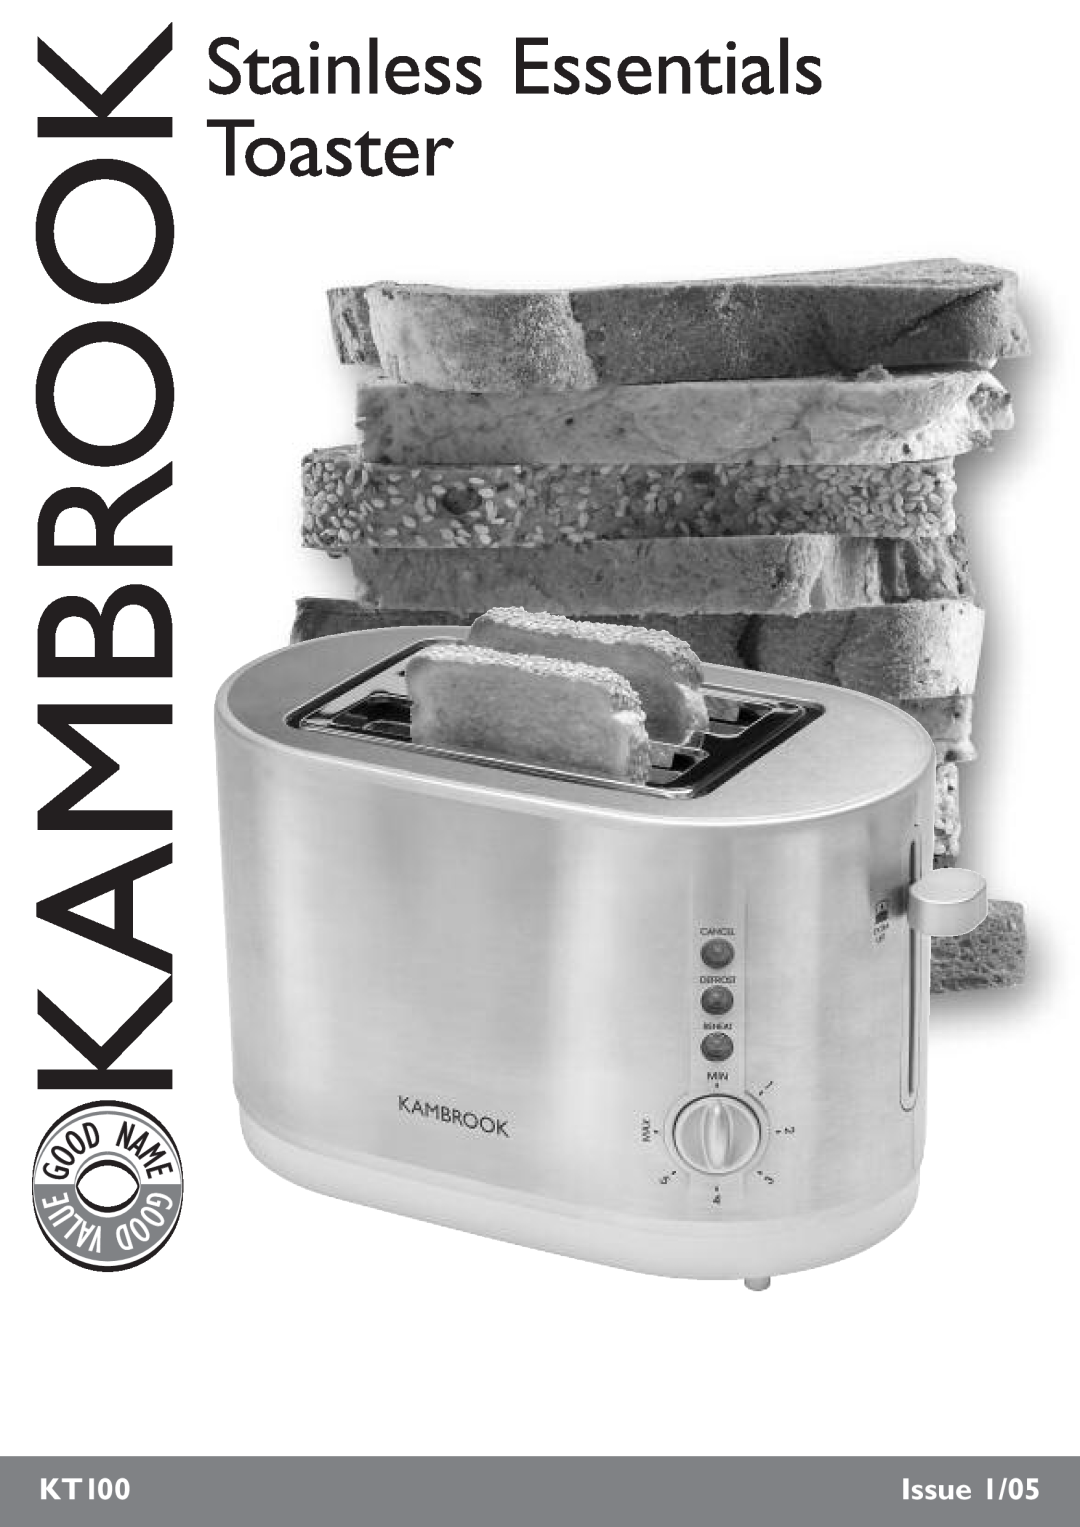 Kambrook KT100 manual U Lav, Stainless Essentials Toaster, Issue 1/05 